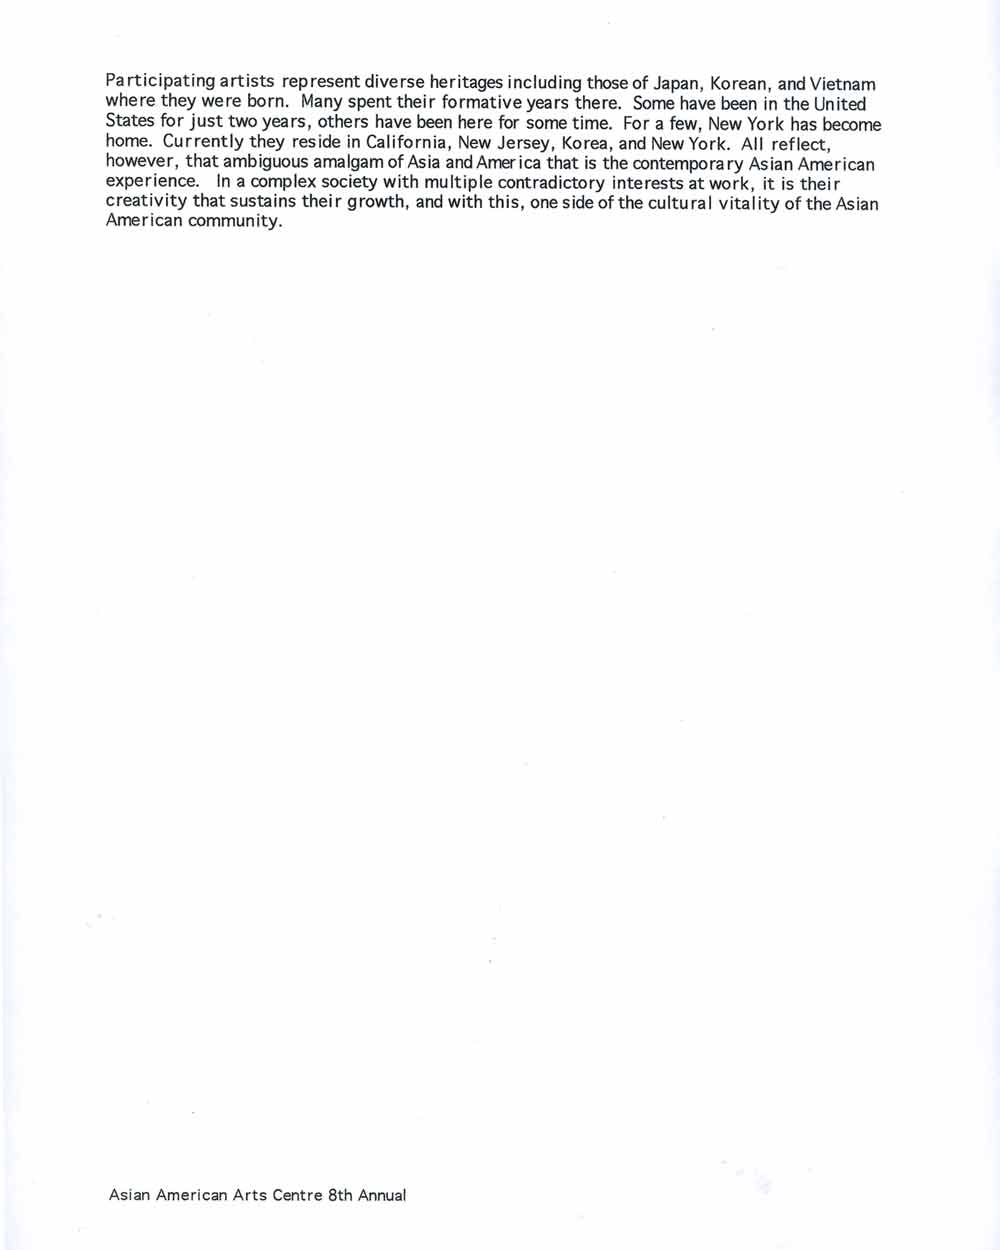 Day and Night Transparent press release, pg 2